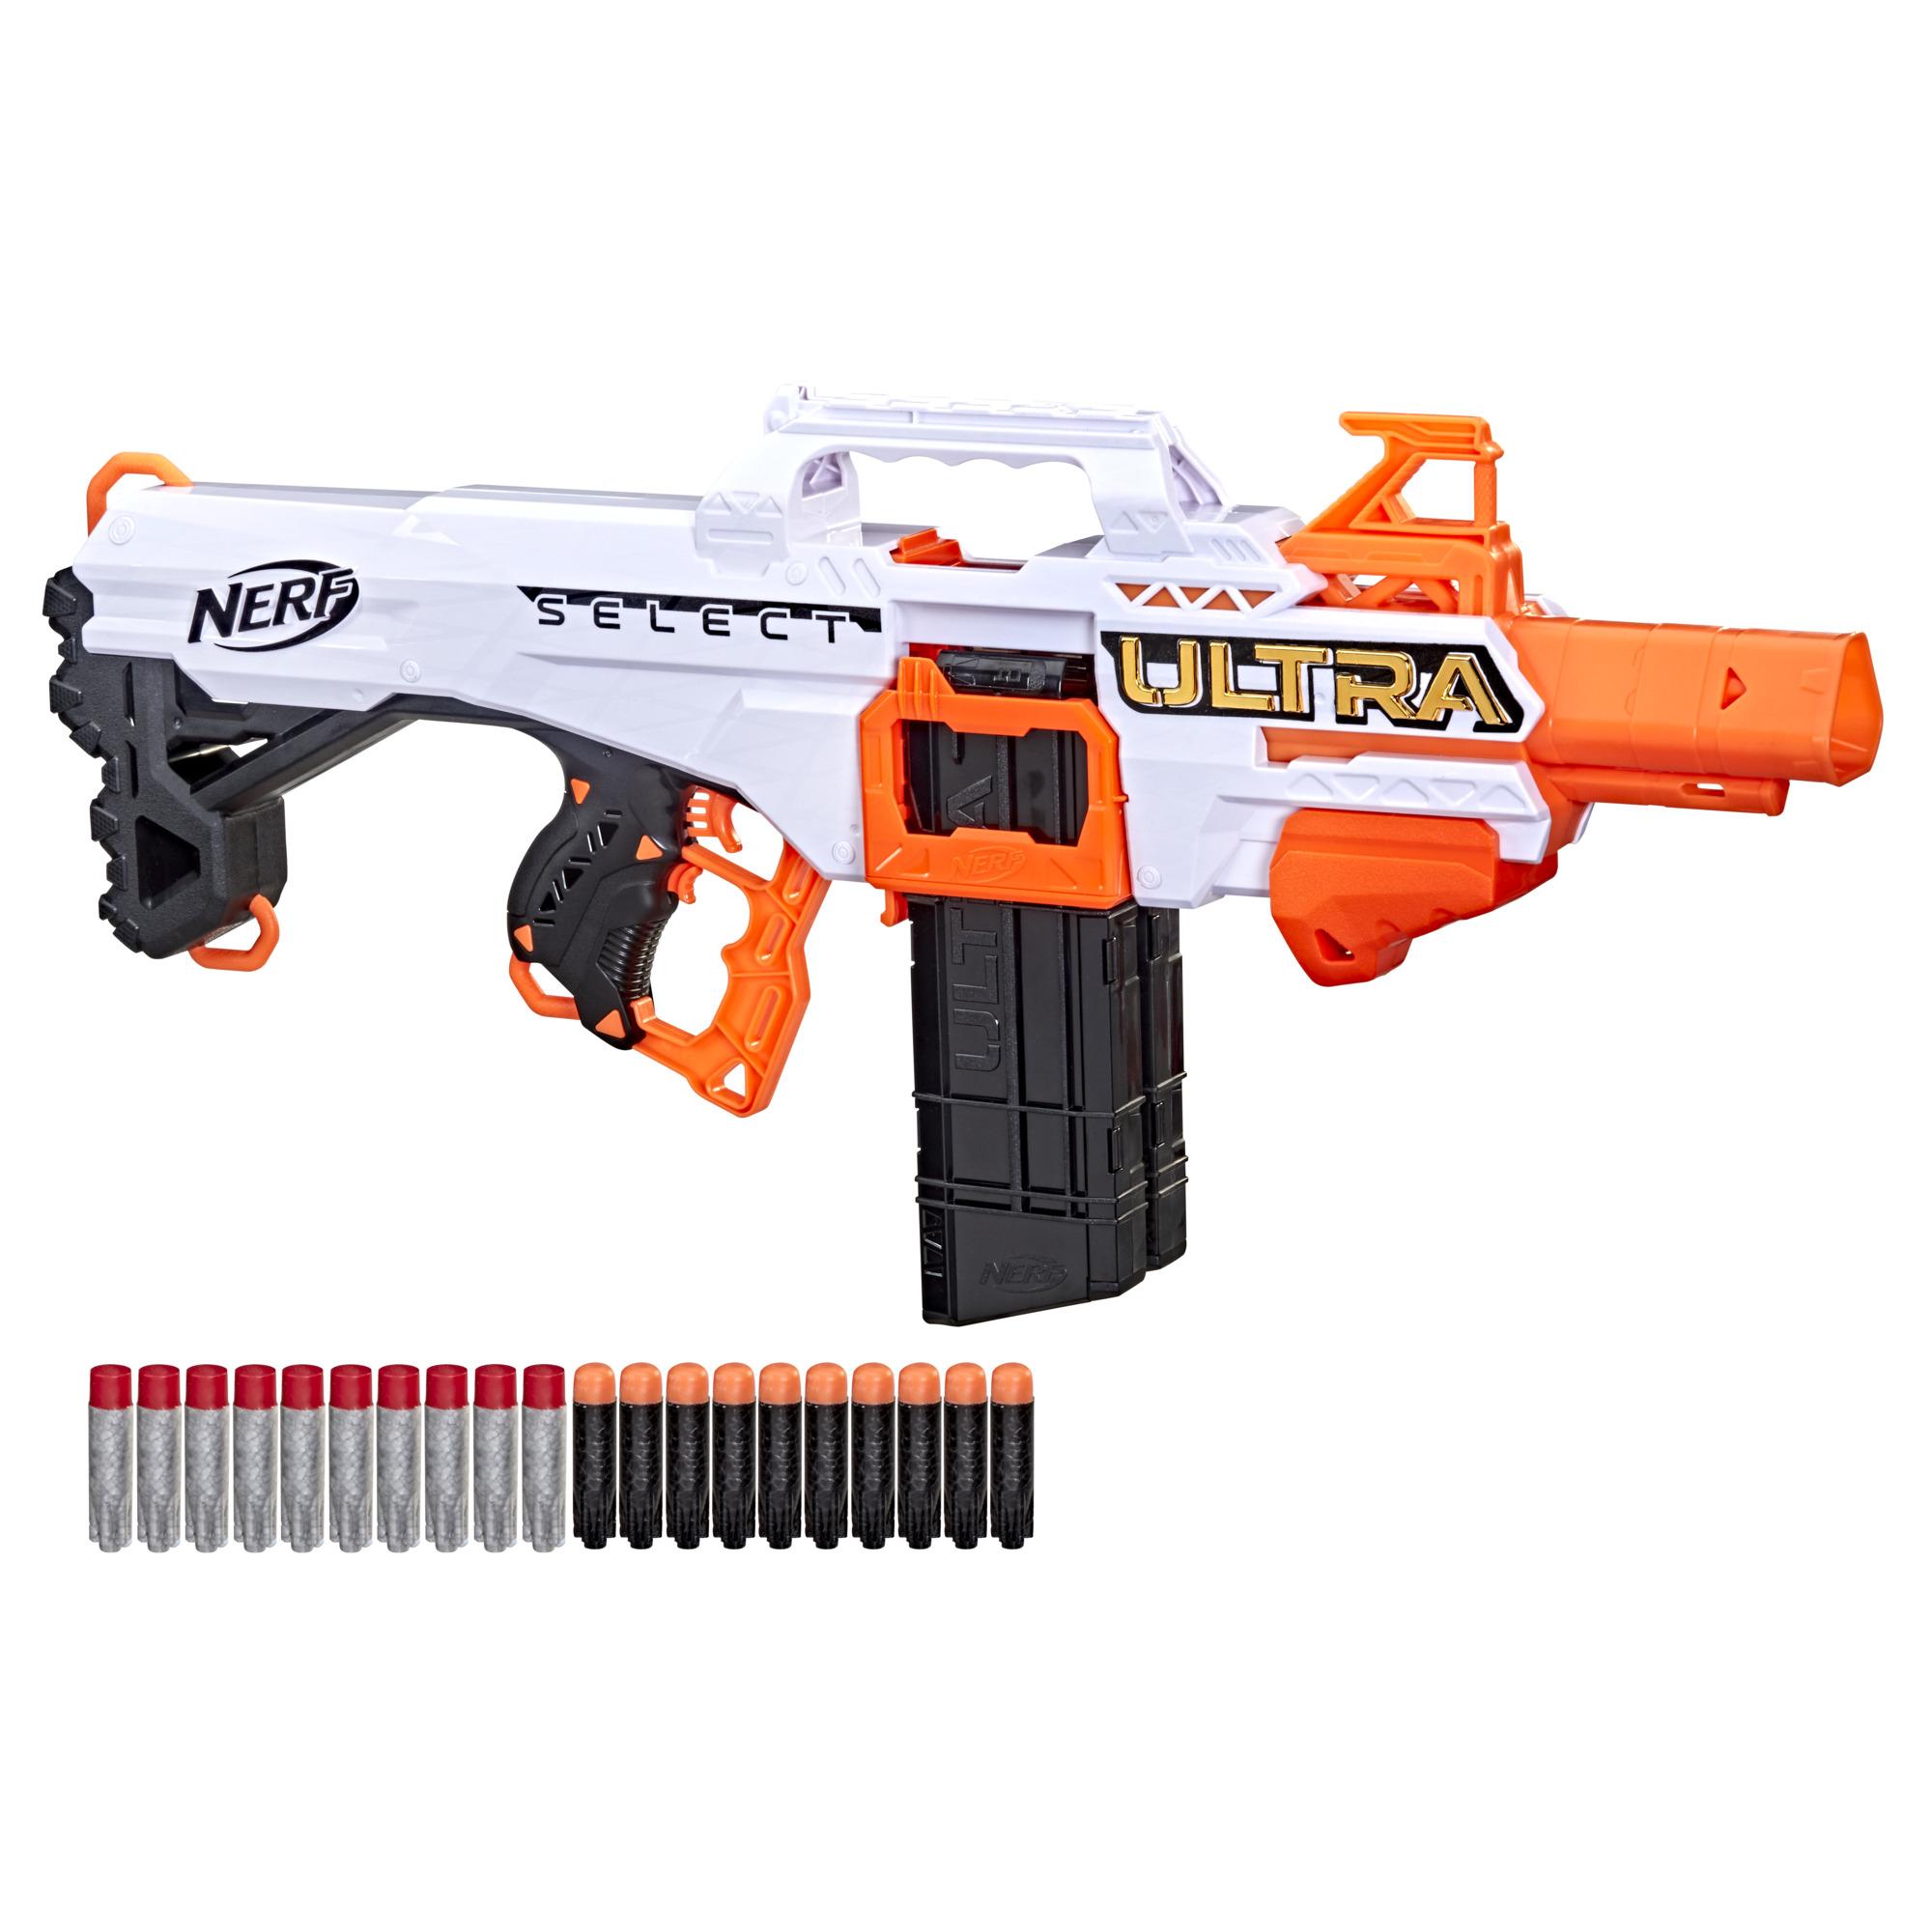 Nerf Ultra Select Fully Motorized Blaster, Fire 2 Ways, Includes